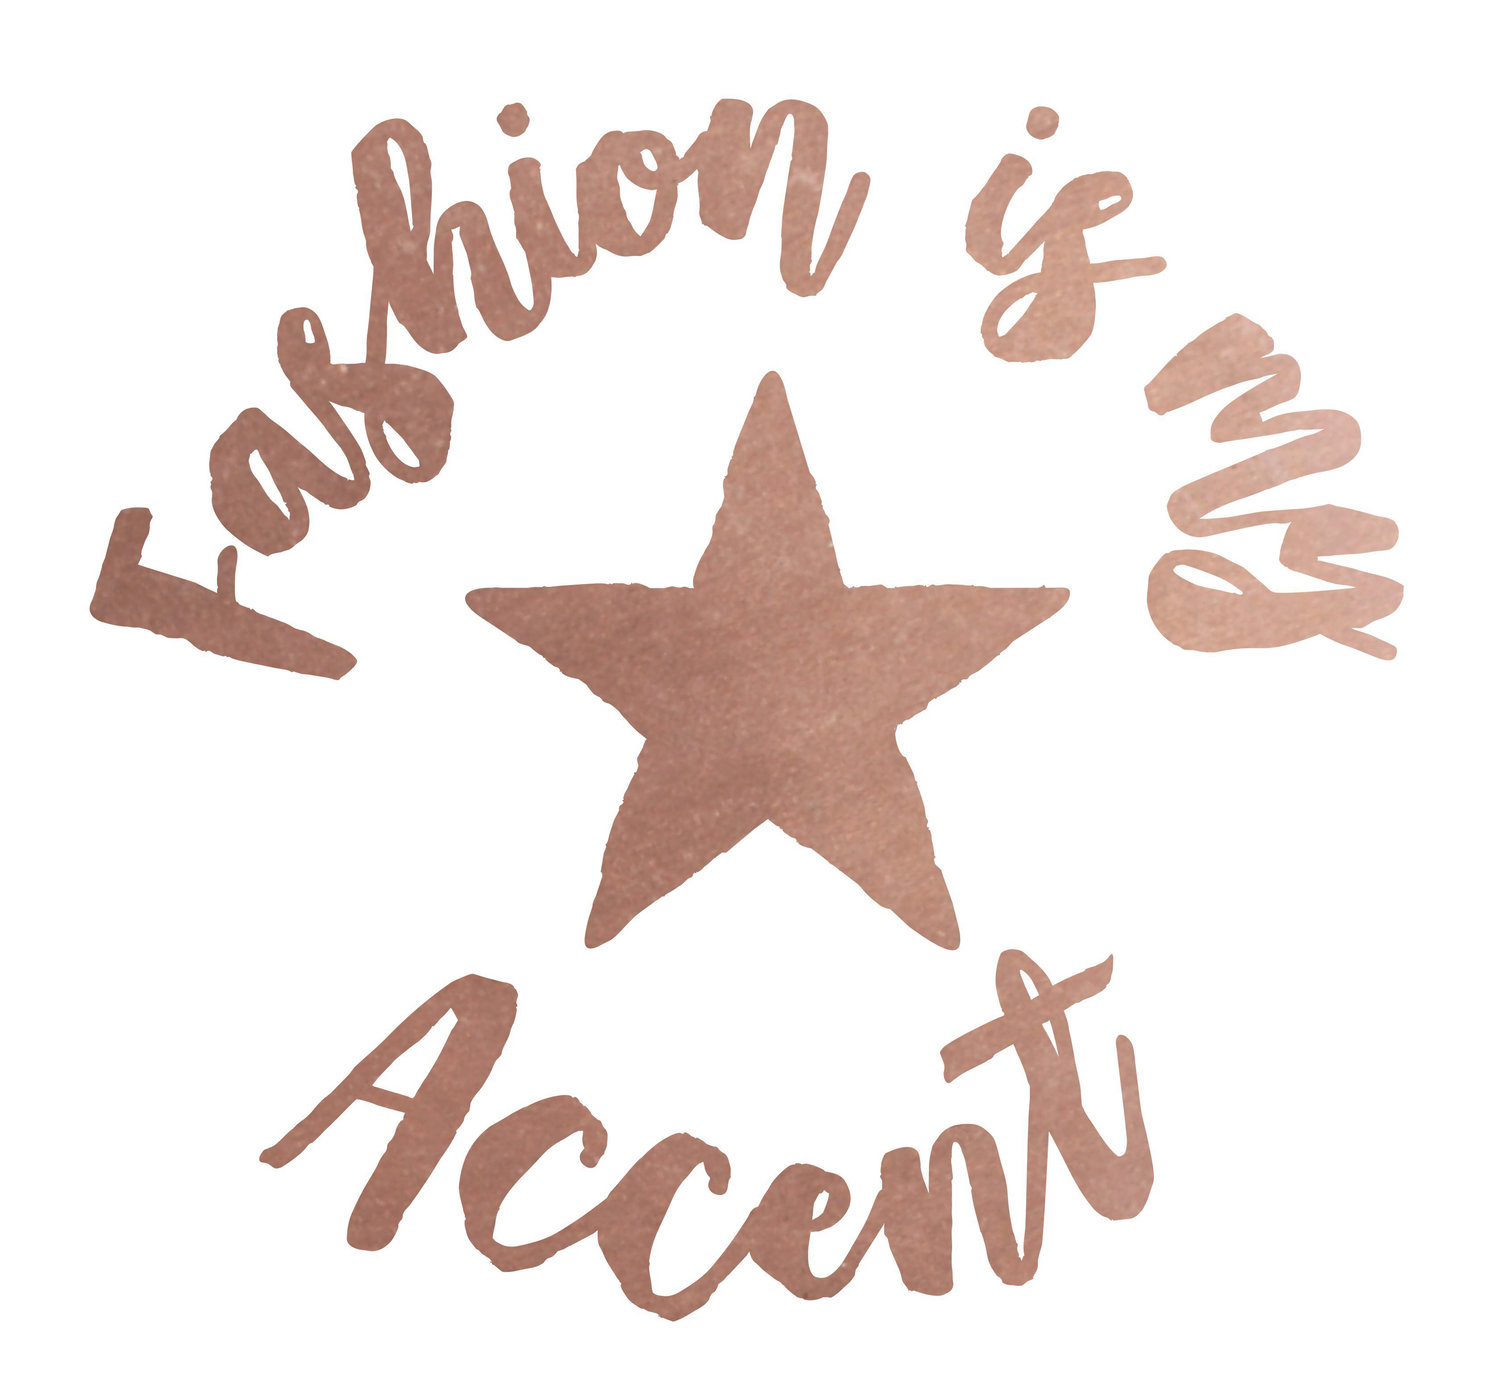 Fashion is My Accent